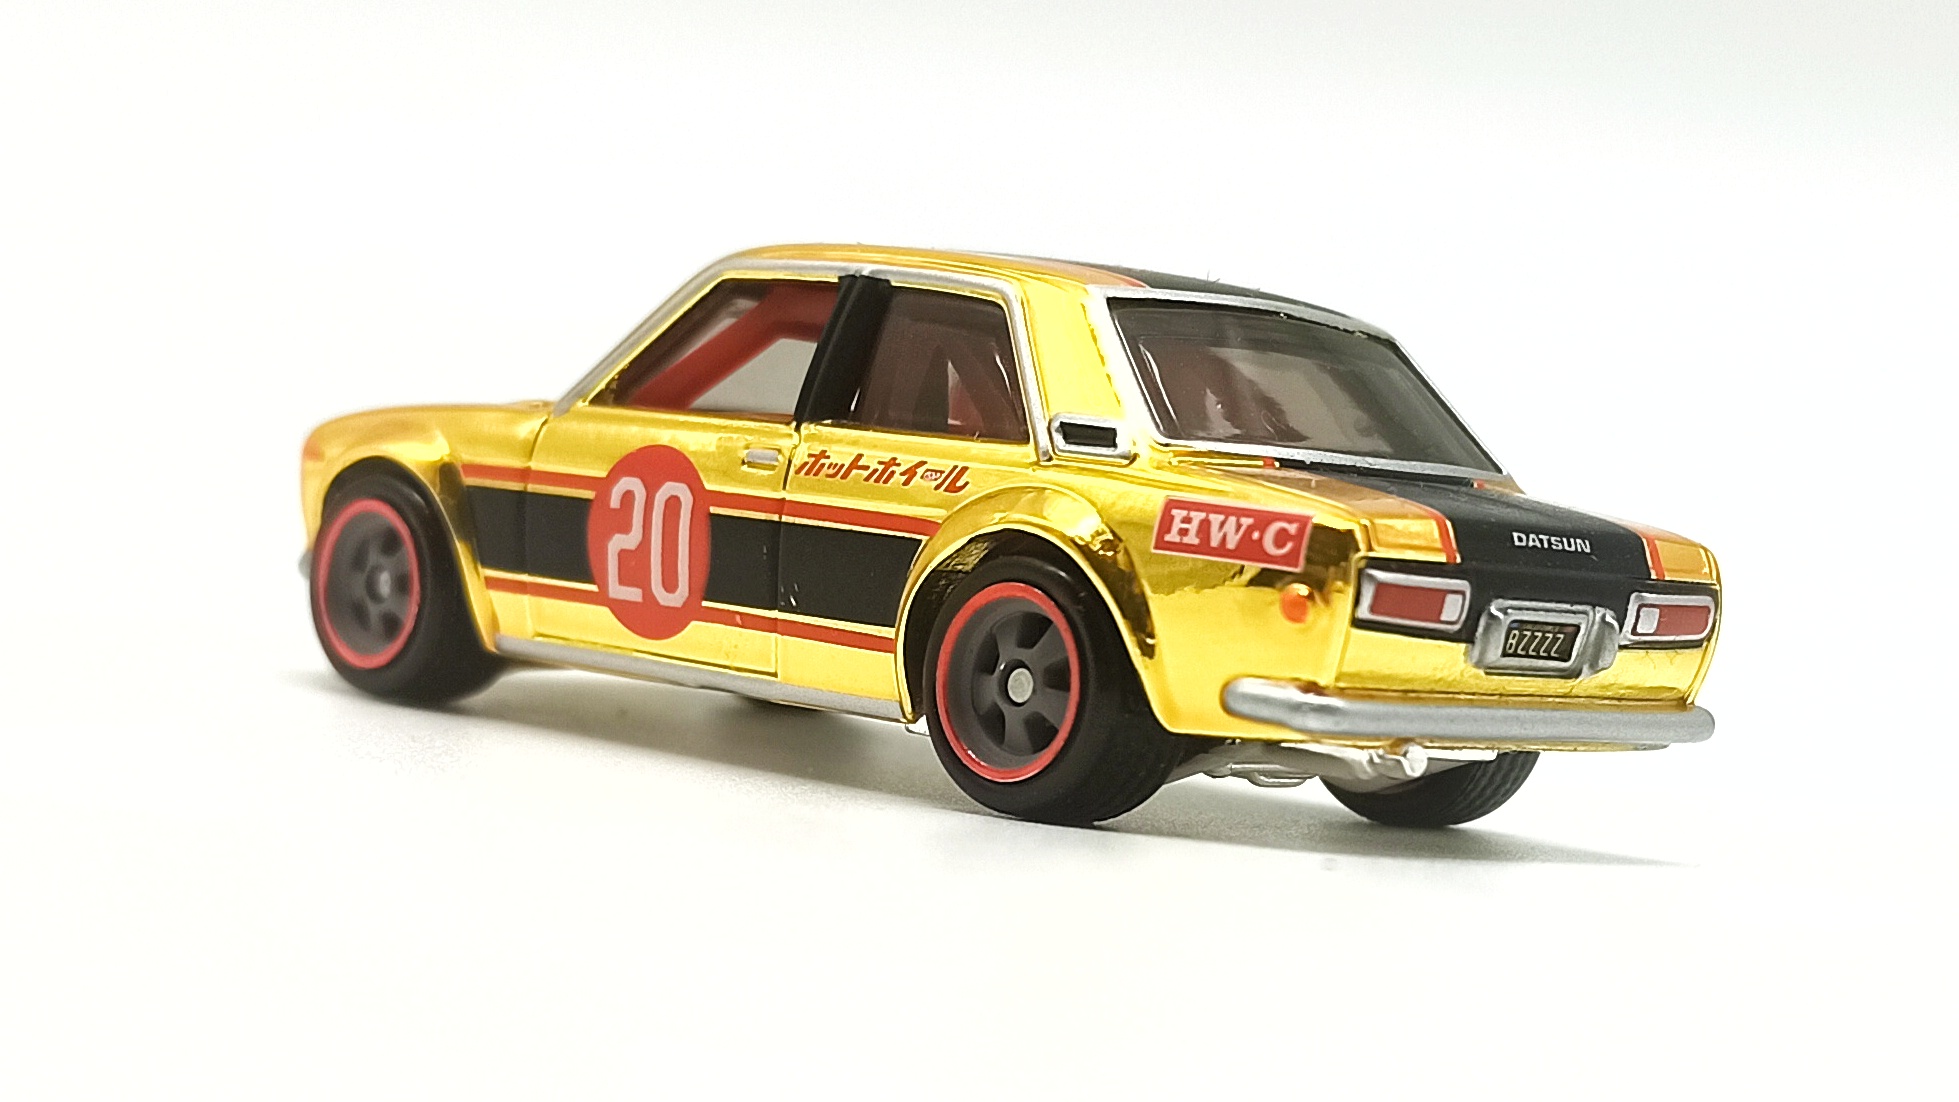 Hot Wheels Datsun Bluebird 510 (DTH32) 2020 RLC Exclusive (1 of 15.000) spectraflame bright yellow gold side angle